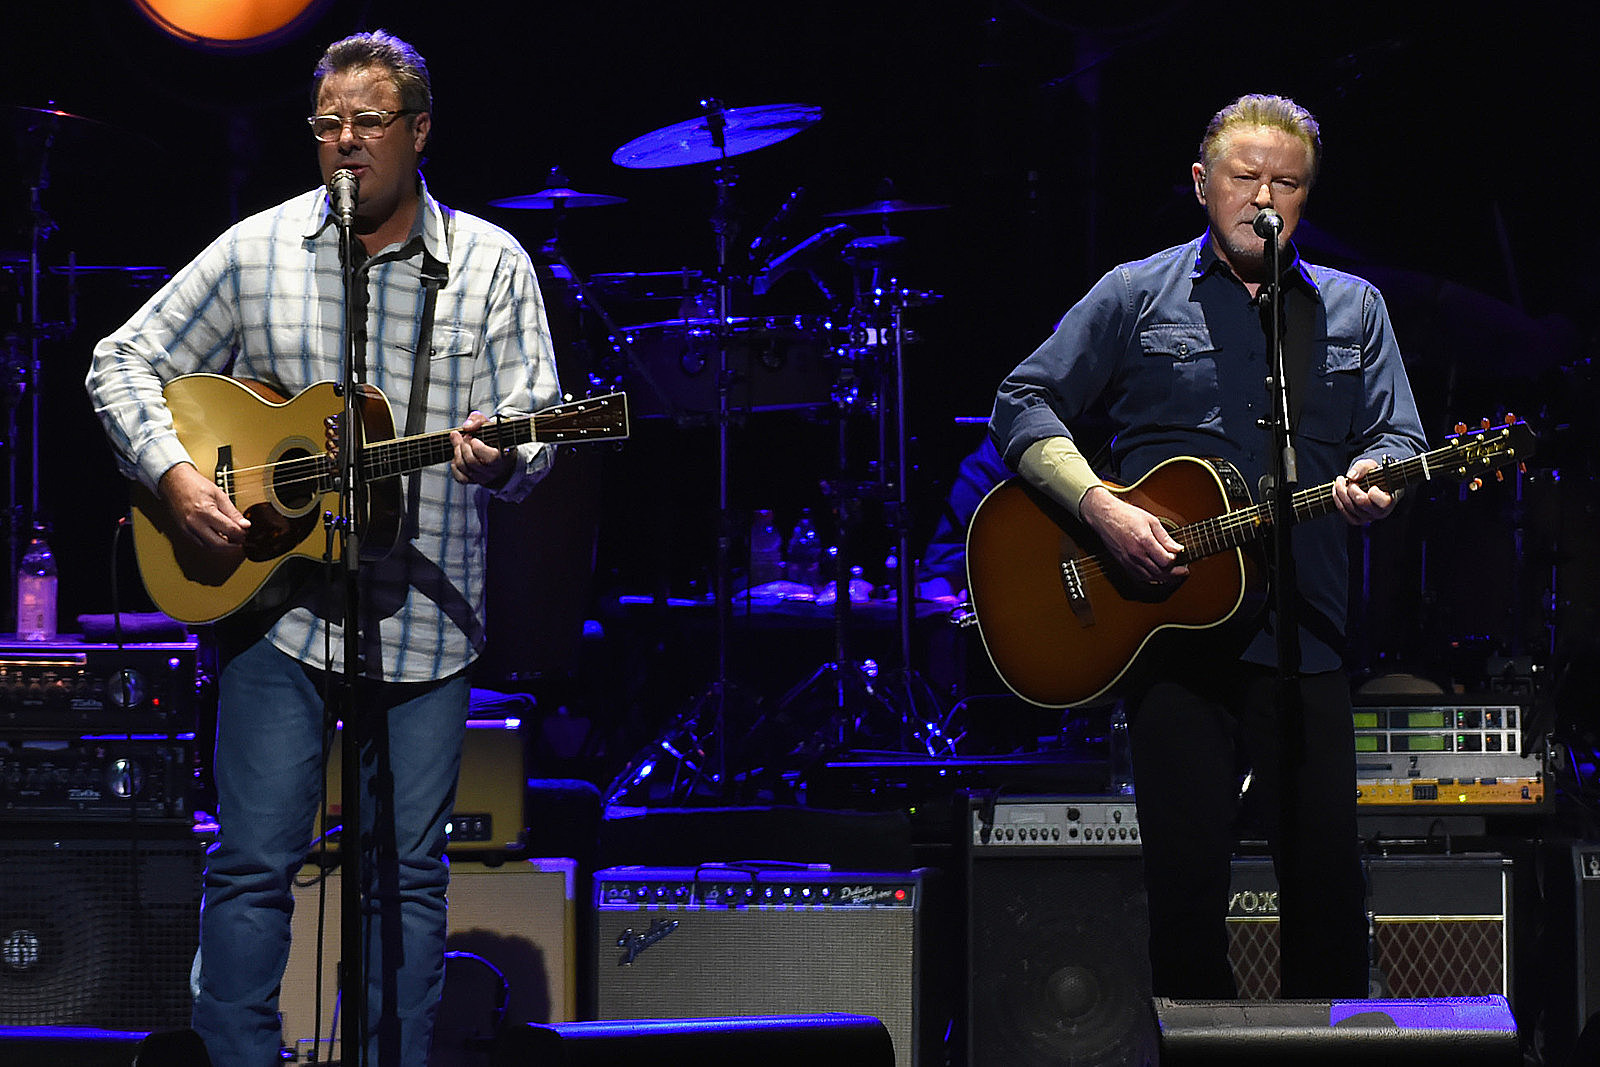 Eagles Extend 'Hotel California' Tour With Five More Dates